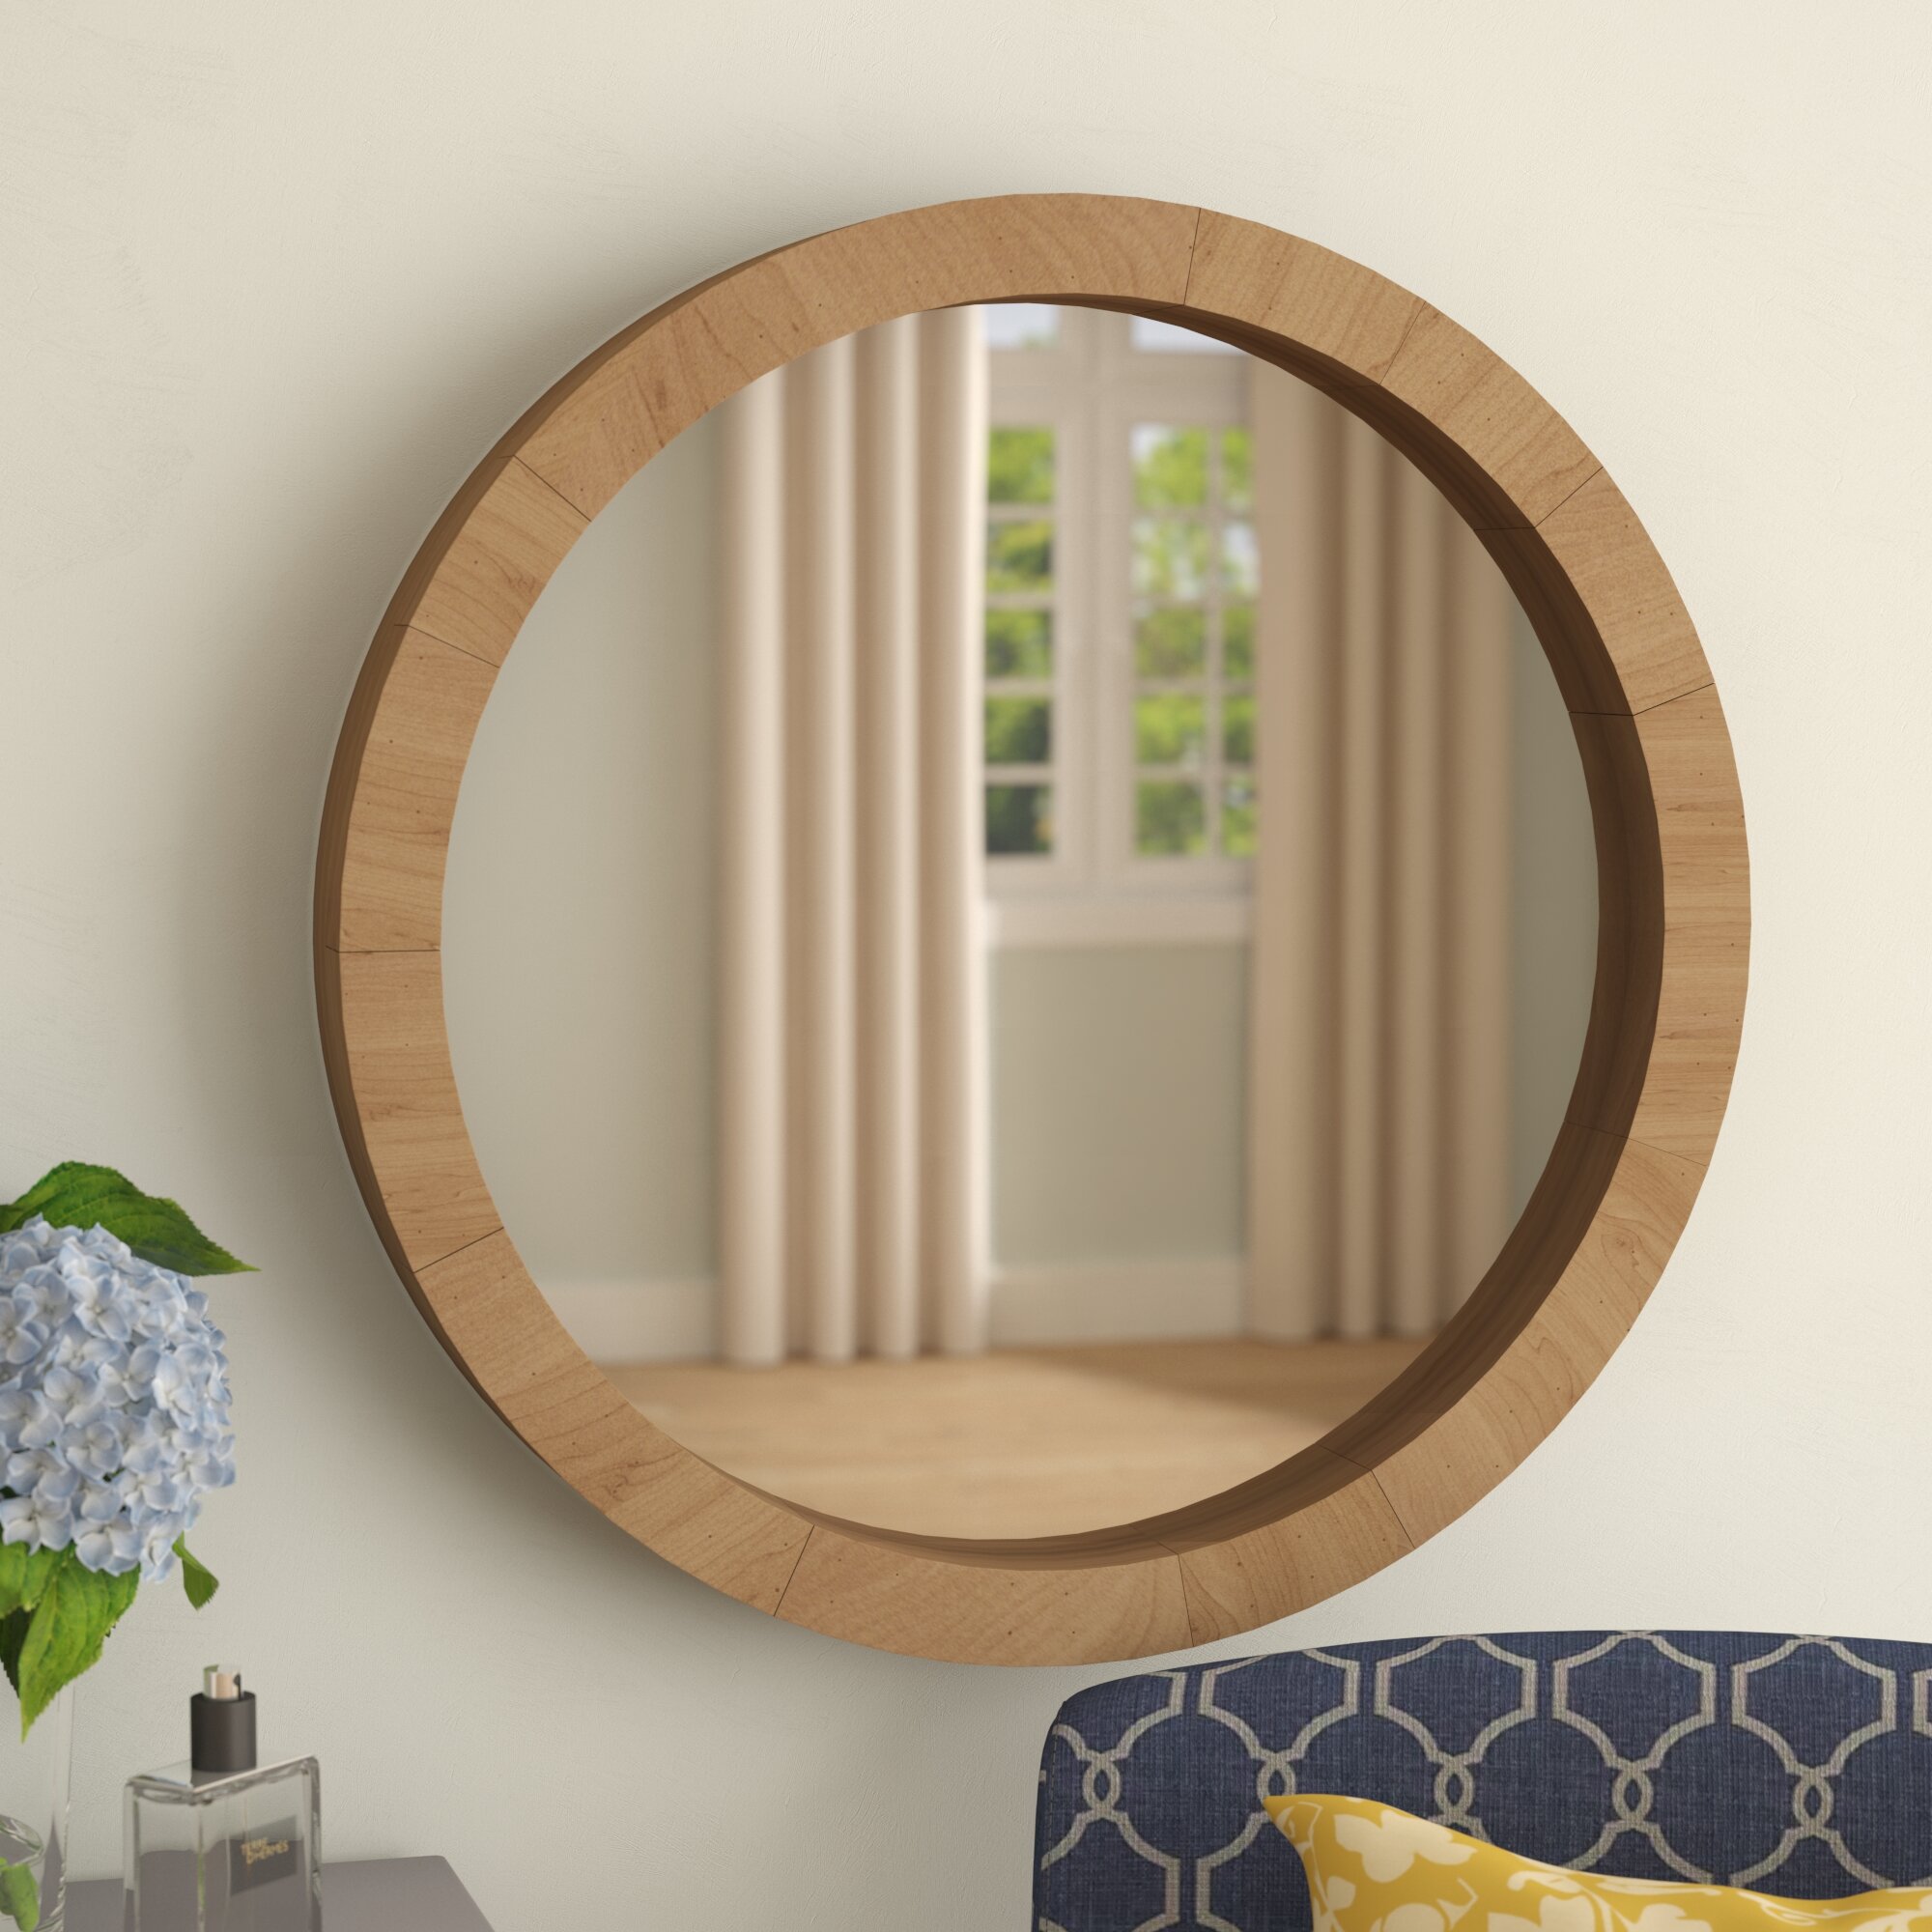 Black Medium Foreside 15 inch Diameter Round Rustic Wall Mirror with Hanging Rope 